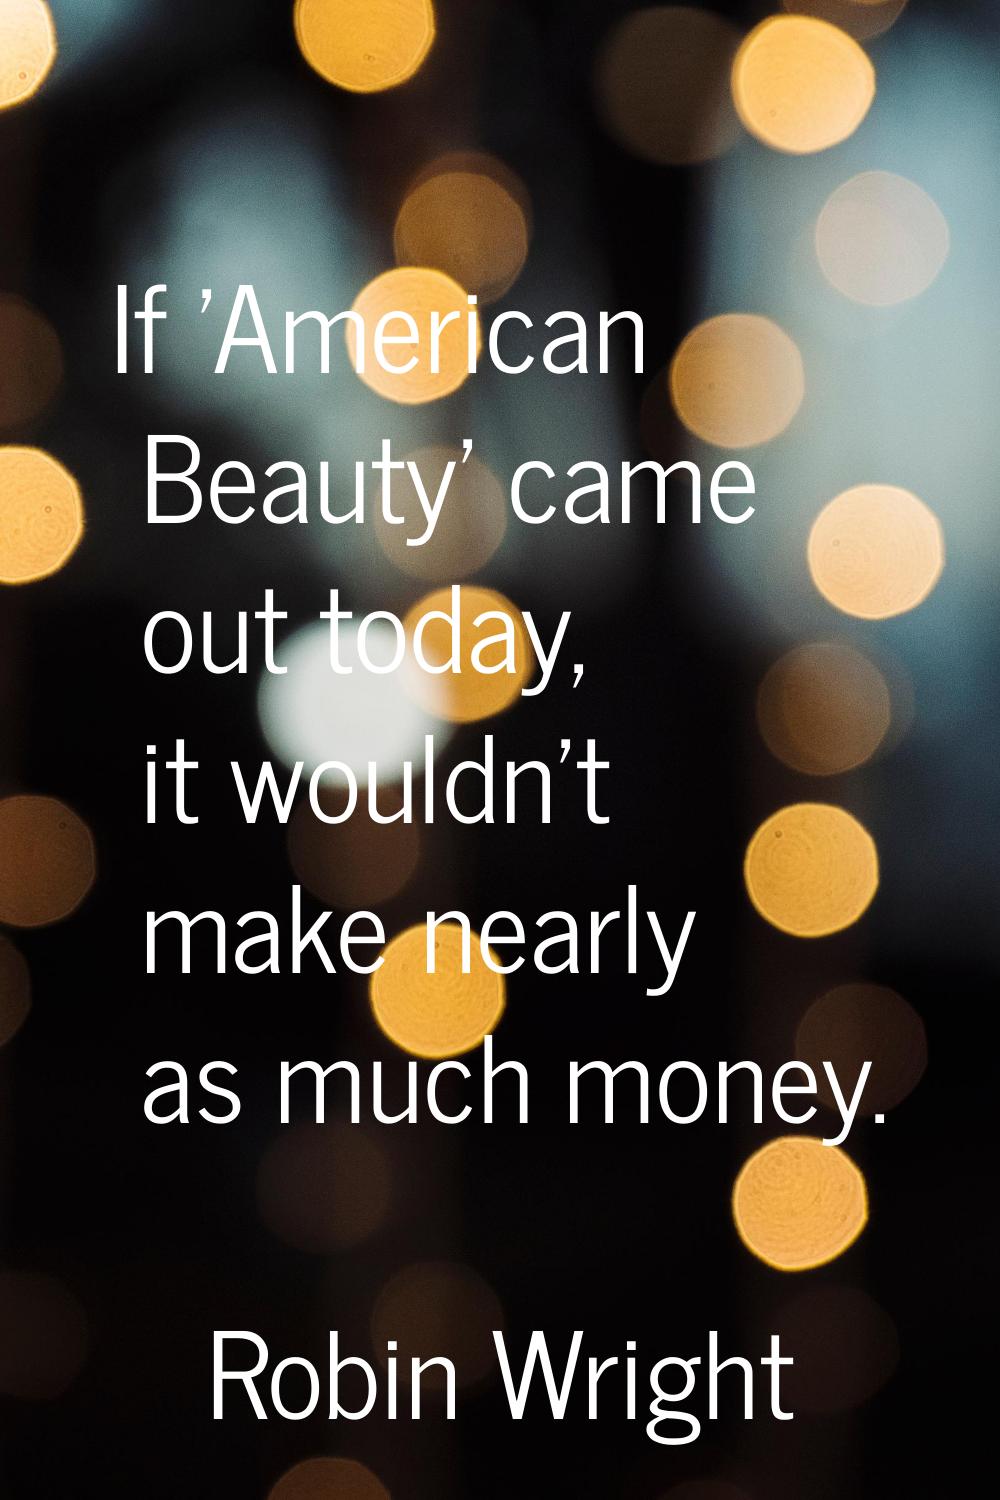 If 'American Beauty' came out today, it wouldn't make nearly as much money.